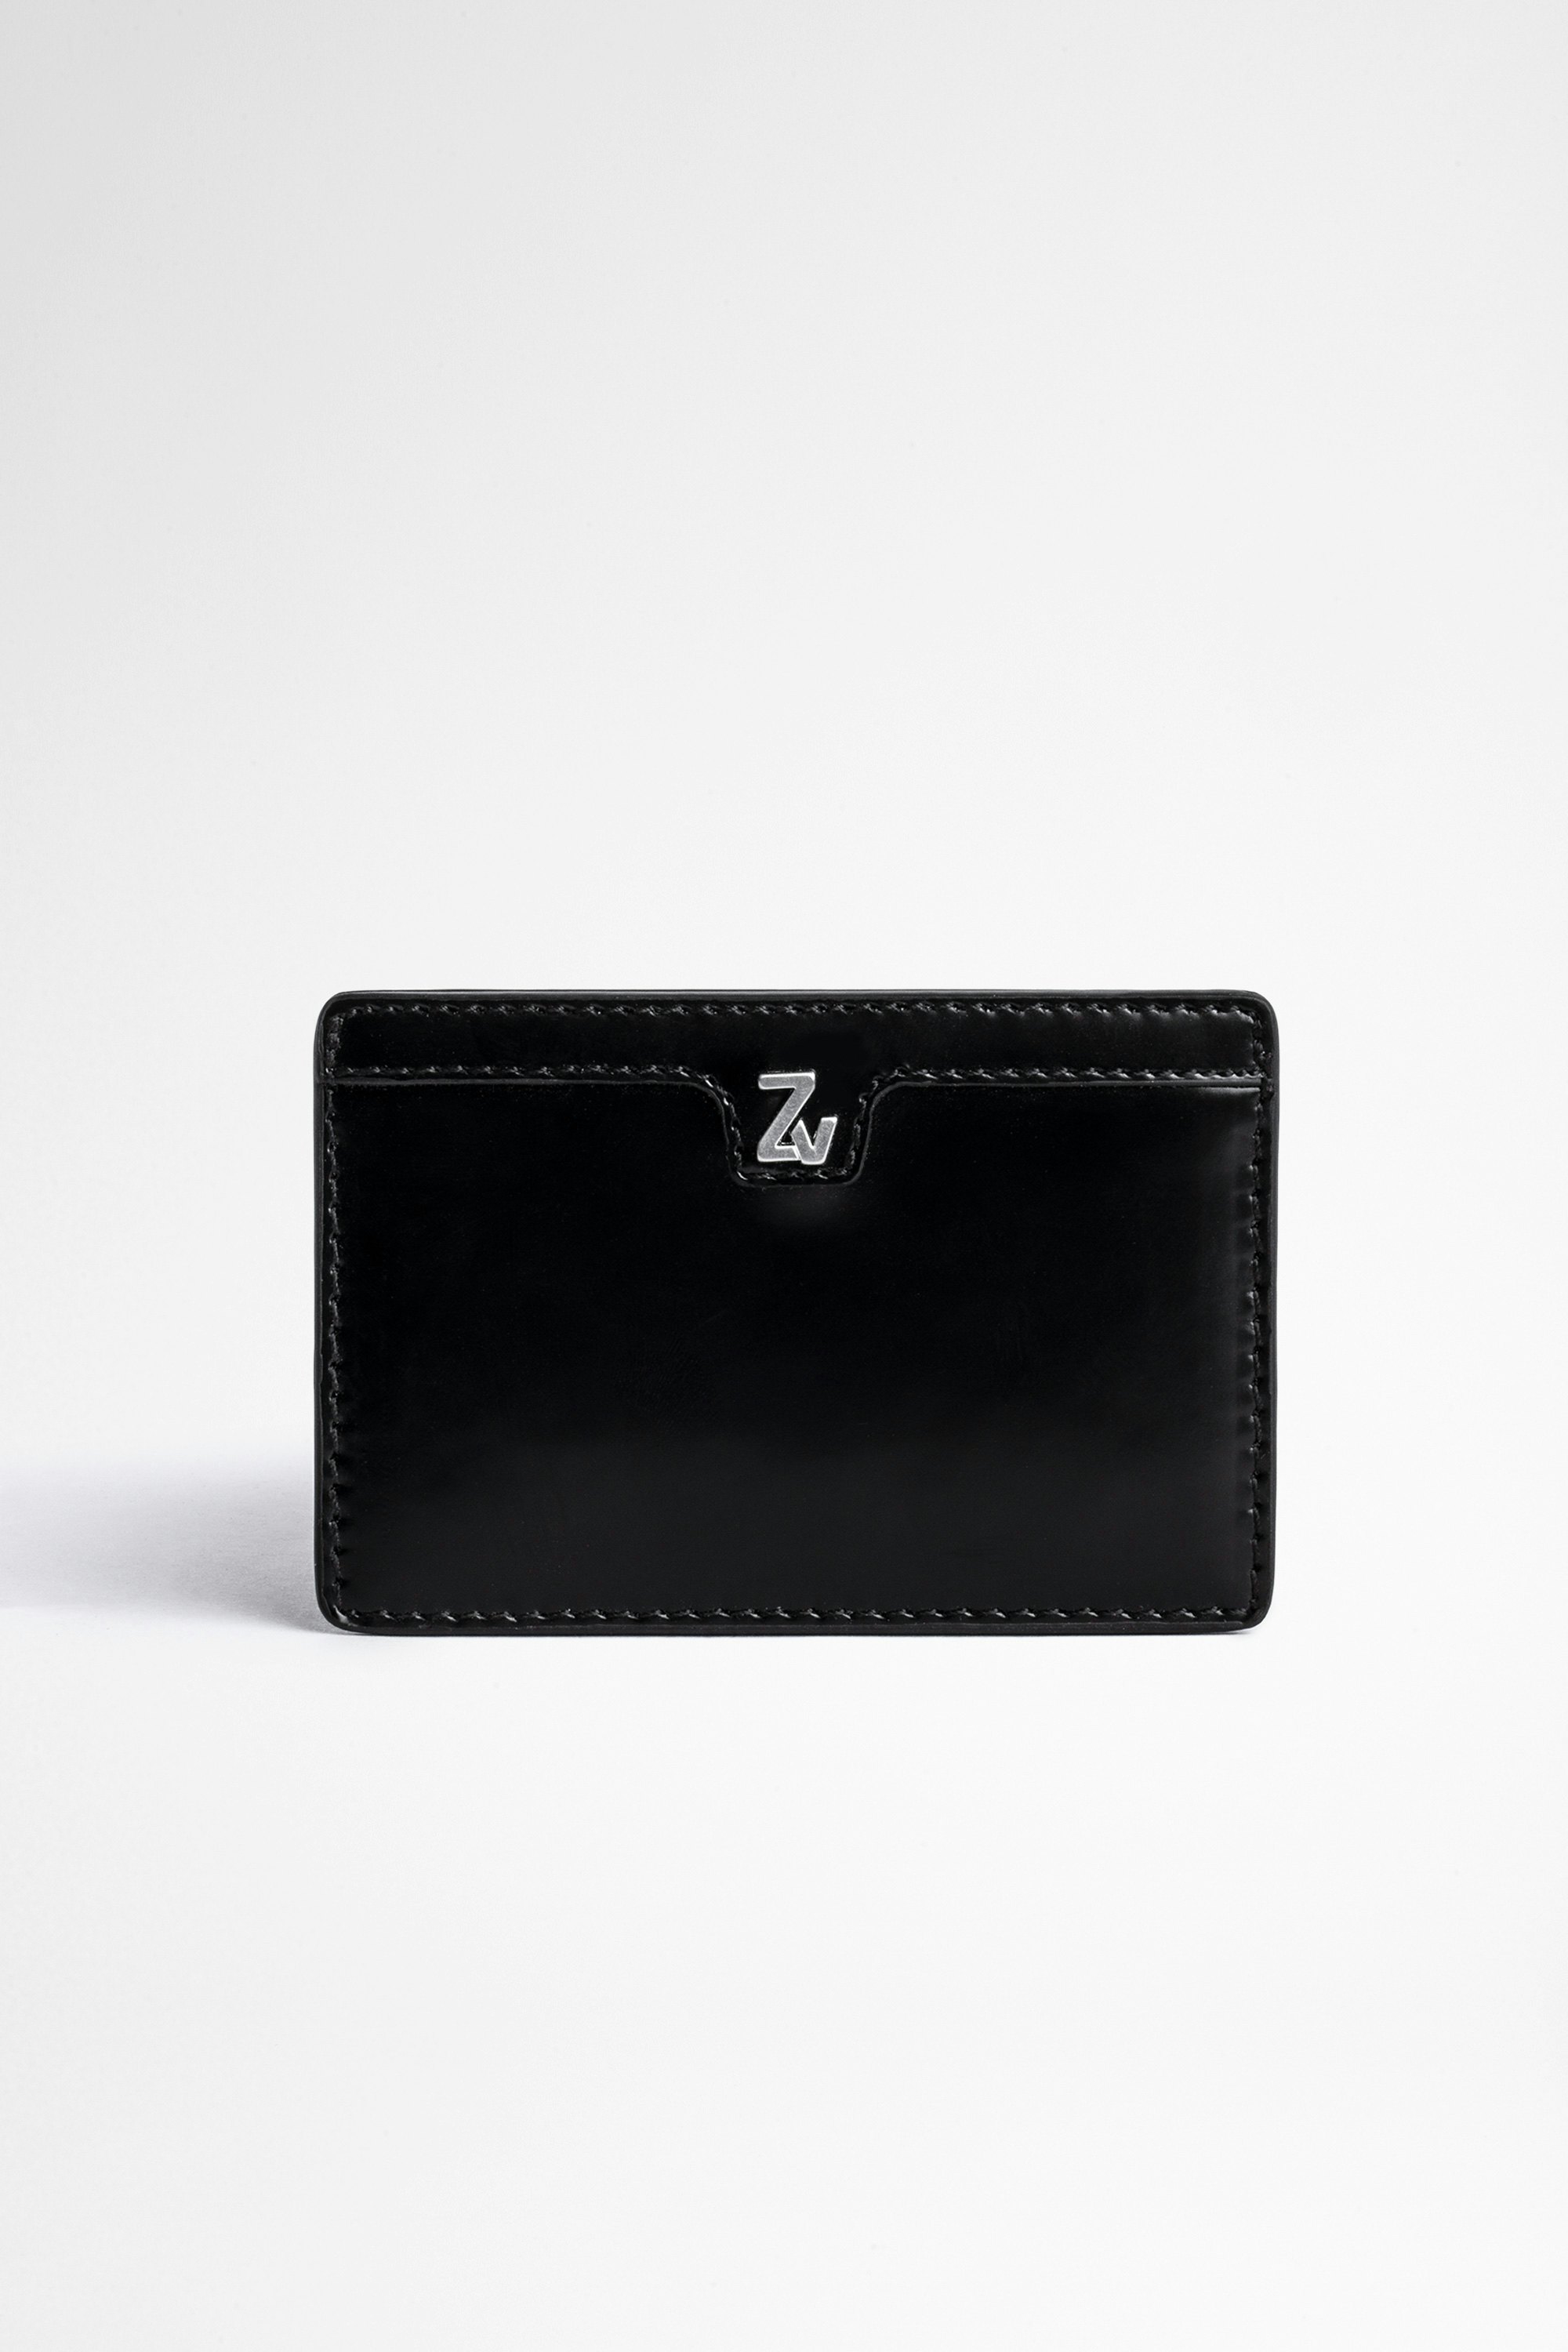 ZV Initiale Nyro レザー財布 Smooth black leather card holder